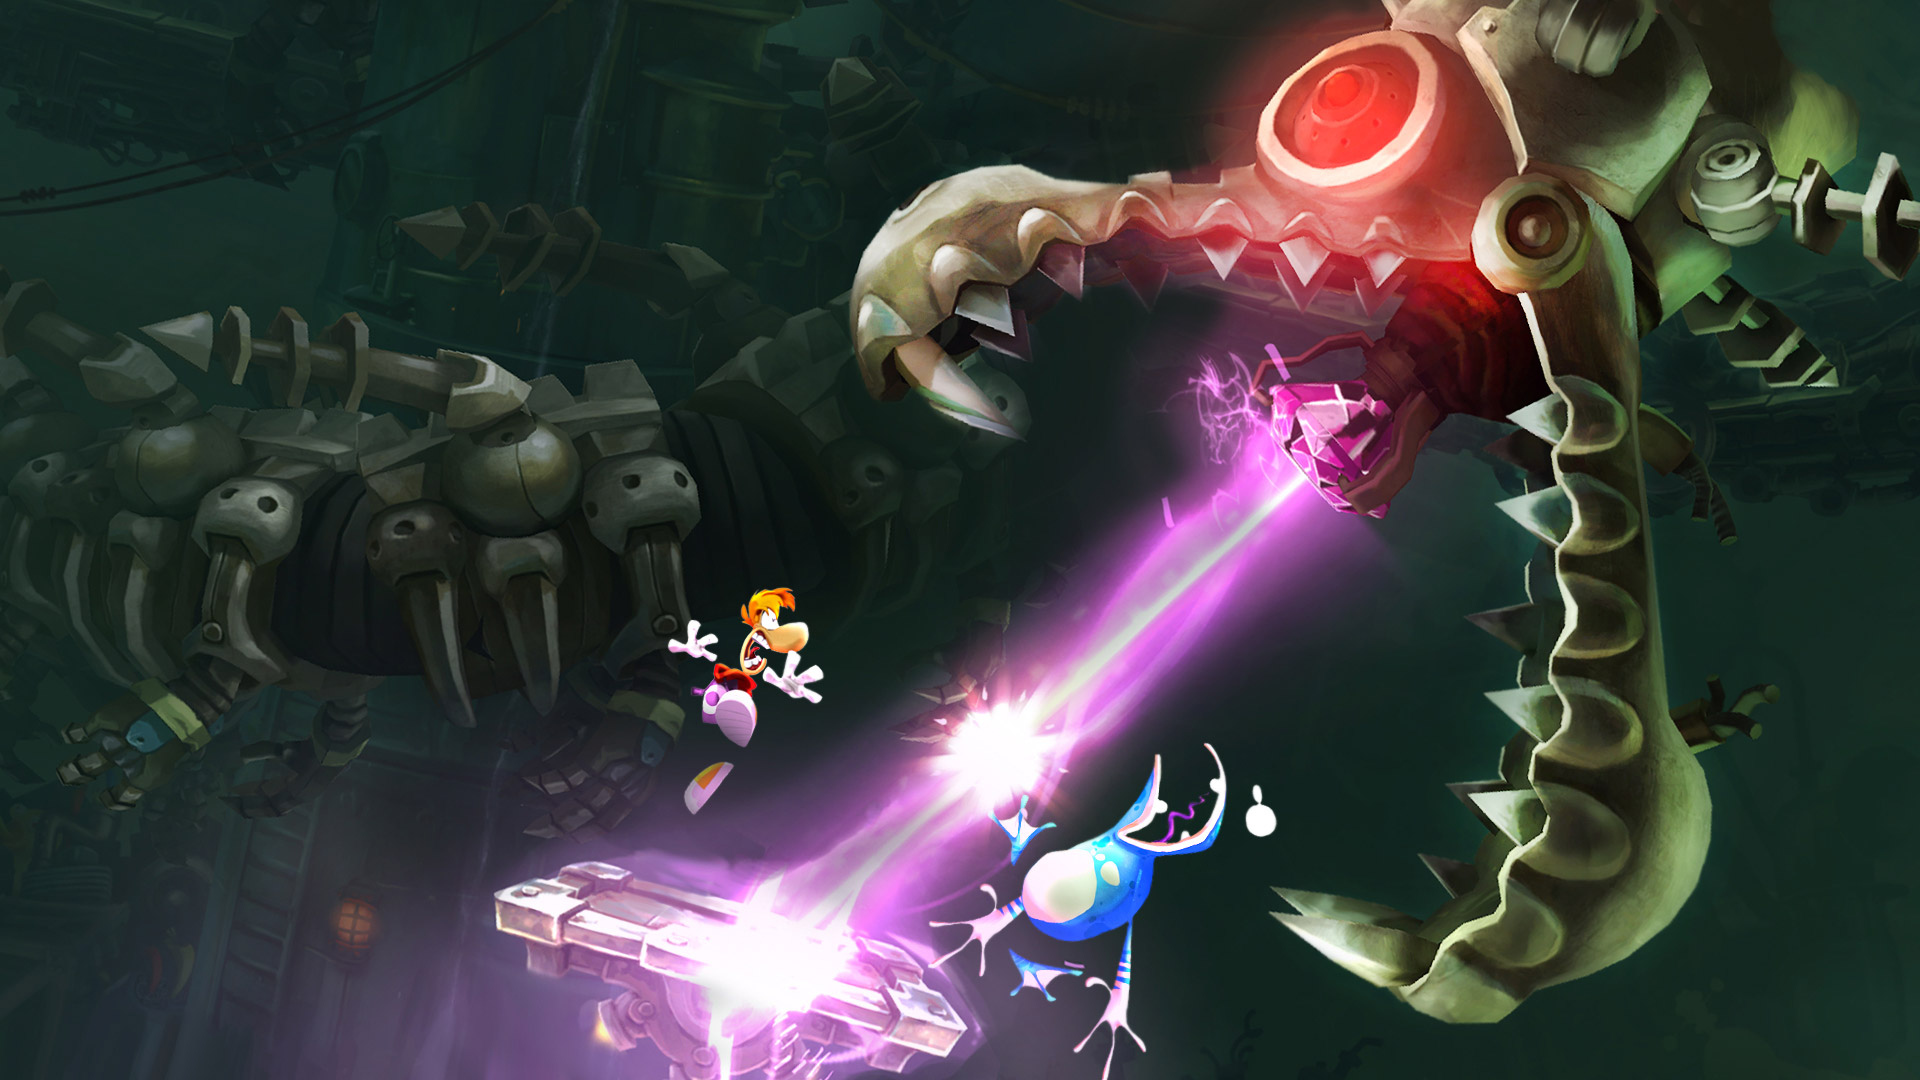 boom game reviews - Rayman Legends